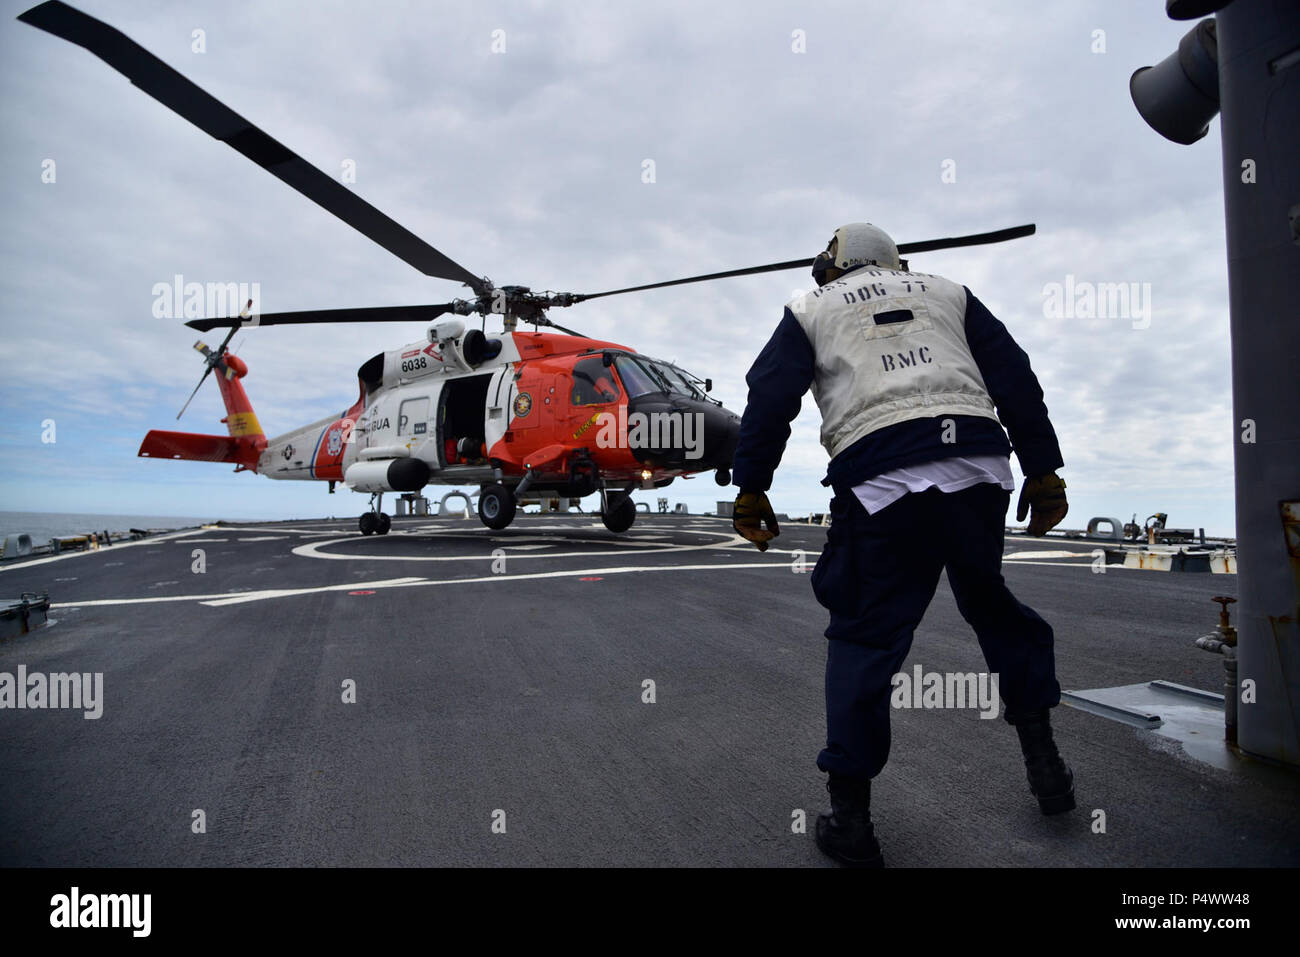 GULF OF ALASKA - A Chief Boatswain's Mate assigned to Arleigh Burke-class guided missile destroyer USS O'Kane (DDG 77) observes a U.S. Coast Guard MH-60T Jayhawk helicopter assigned to Air Station Kodiak, Alaska, landing during flight deck operations in the Gulf of Alaska. Northern Edge 2017 is Alaska's premiere joint-training exercise designed to practice operations, techniques, and procedures as well as enhance interoperability among the services. Thousands of participants from all the services; Sailors, Soldiers, Airmen, Marines, and Coast Guard personnel from active duty, Reserve and Natio Stock Photo